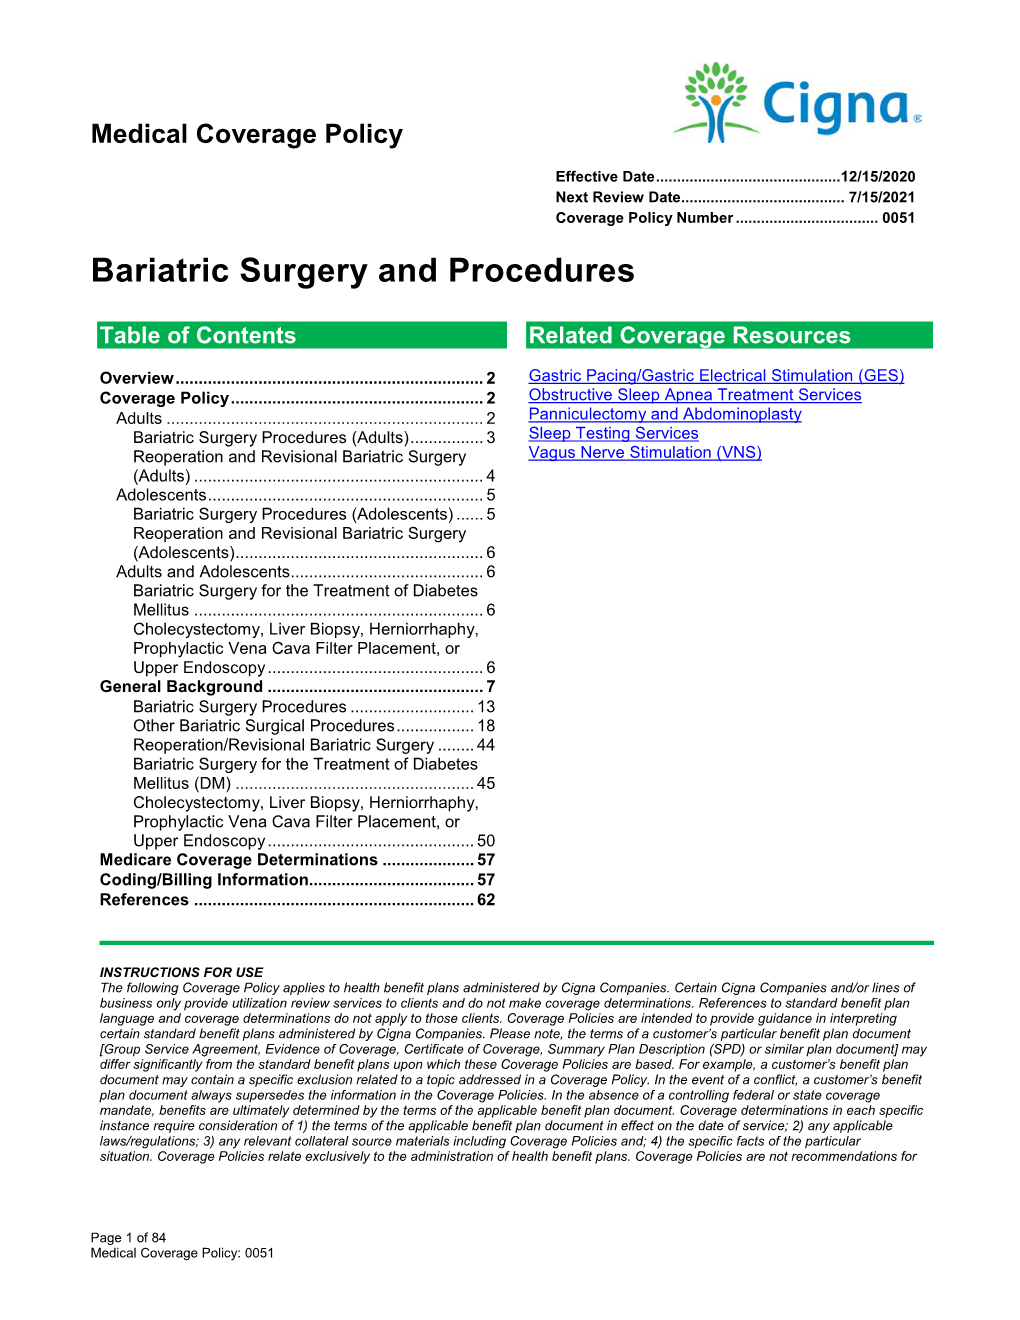 Bariatric Surgery and Procedures